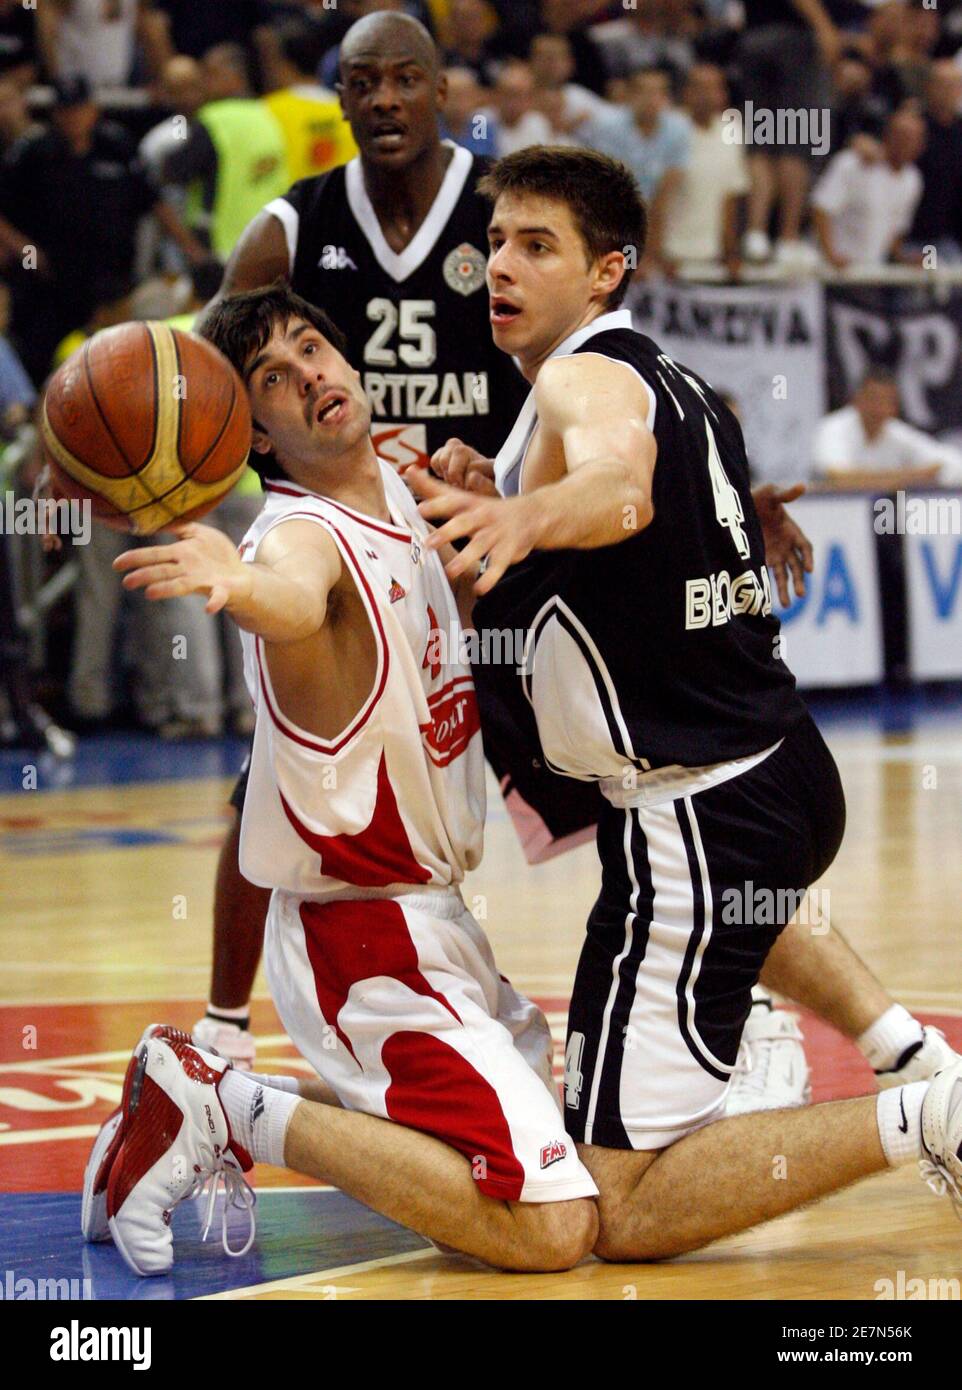 Milos Teodosic (L) of FMP struggles for the ball with Milenko Tepic of Partizan during their Serbian Basketball Championships semi-final match in Belgrade June 8, 2007.  REUTERS/Ivan Milutinovic   (SERBIA) Stock Photo